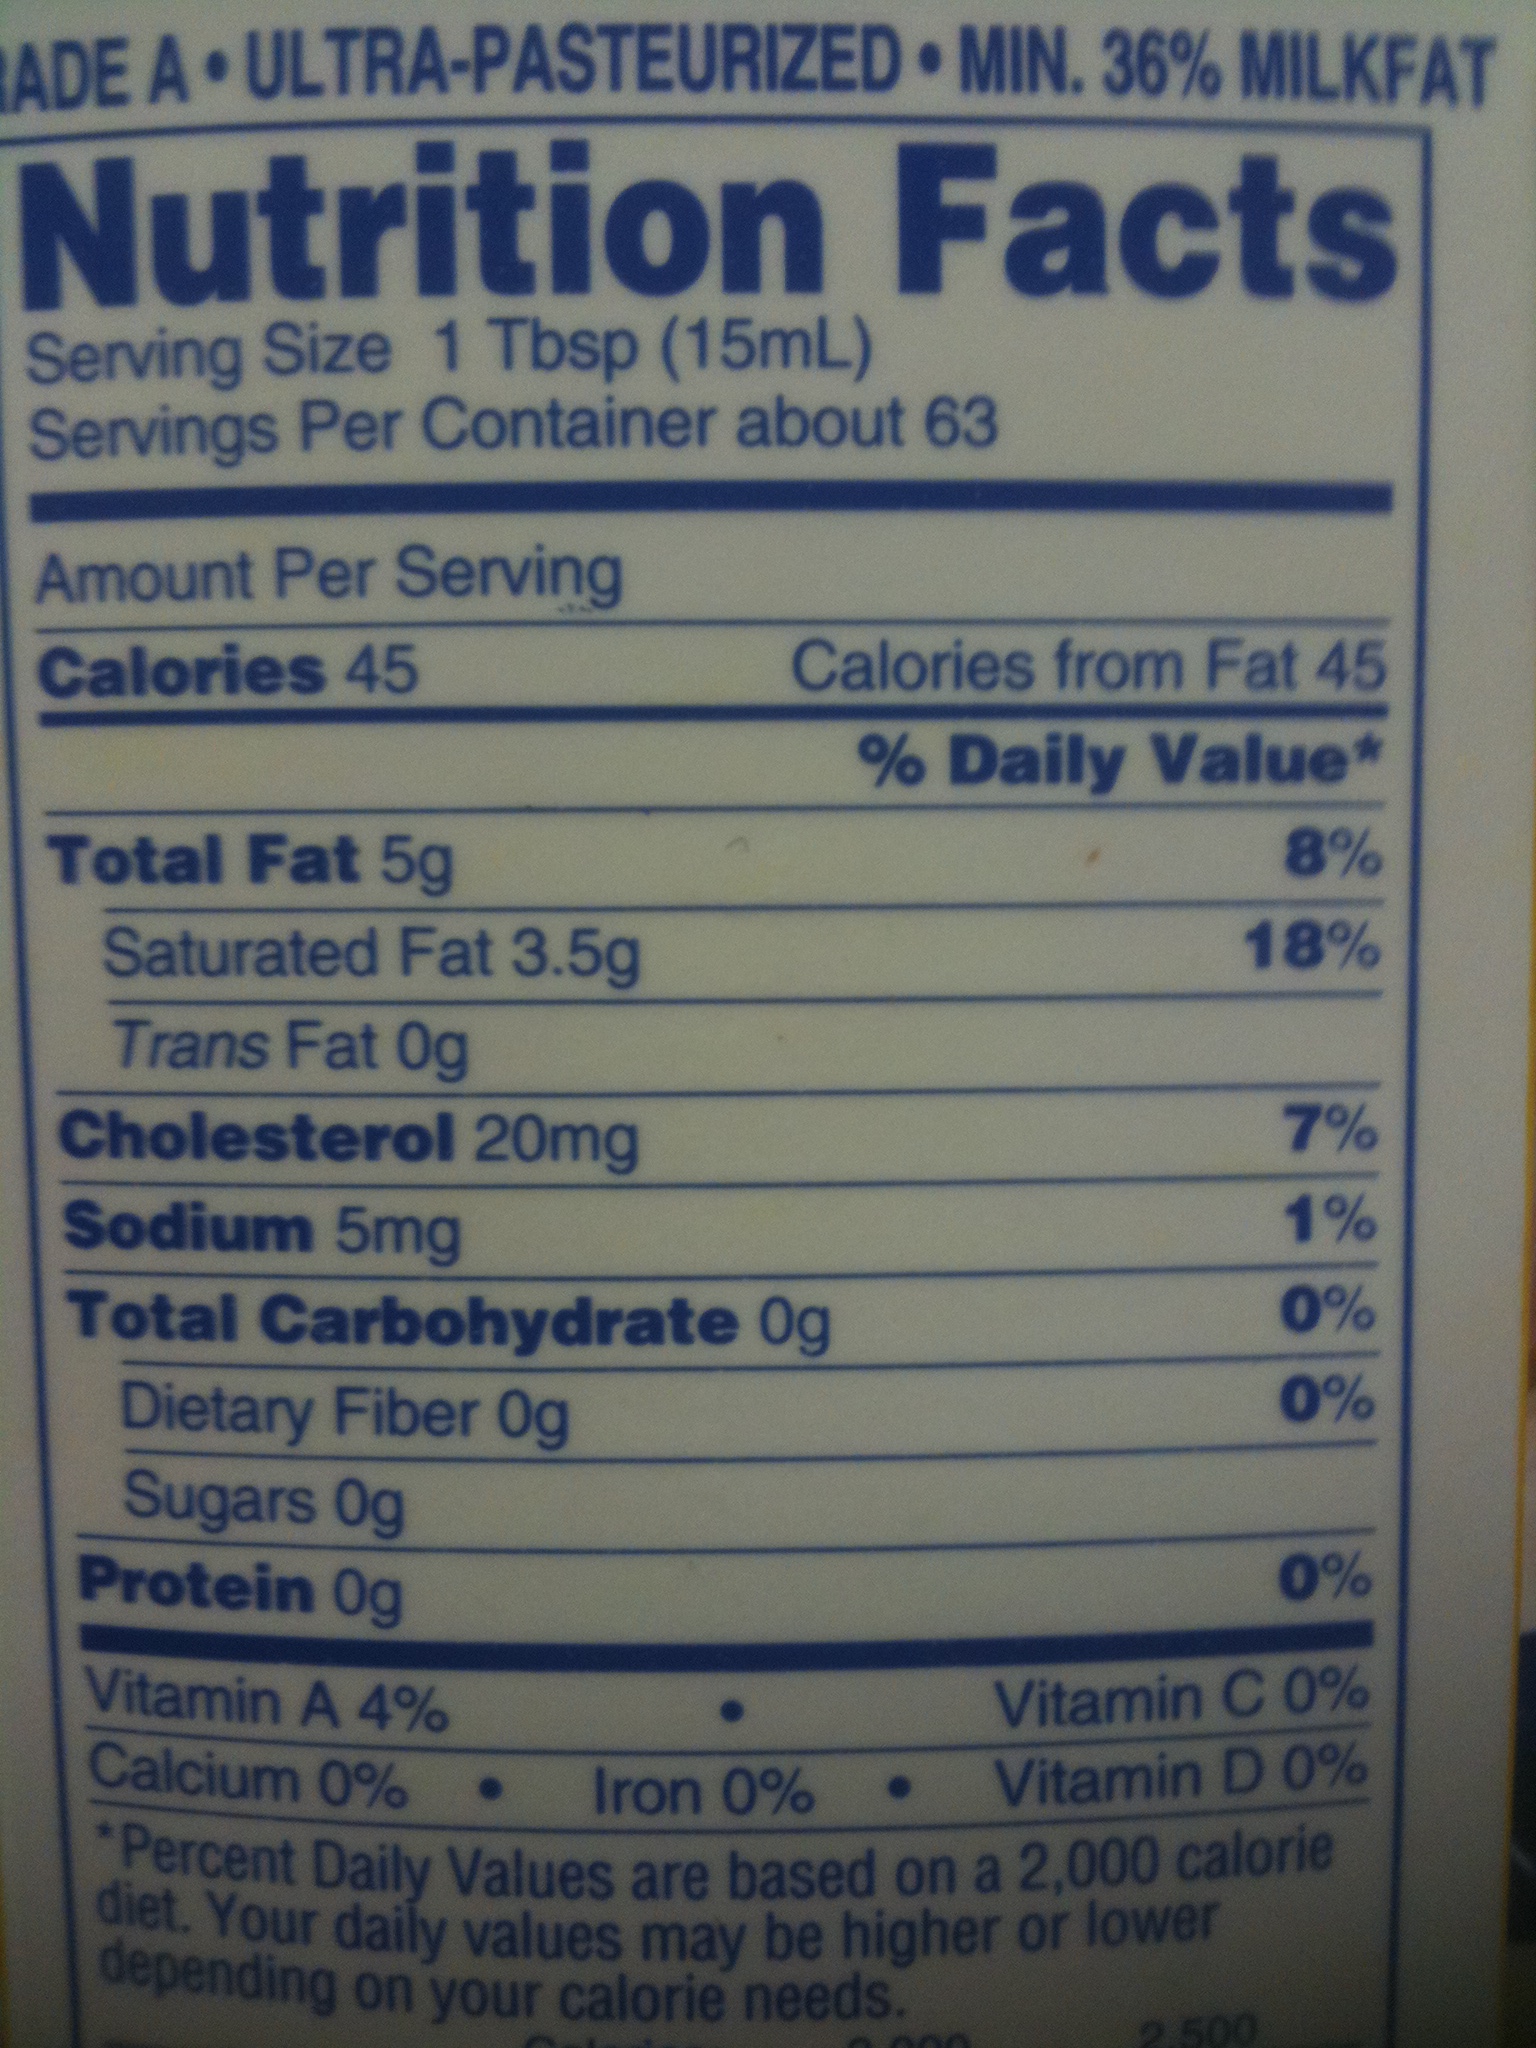 Dye Diet Eat Food Not Food Additives with Nutrition Facts Heavy Cream